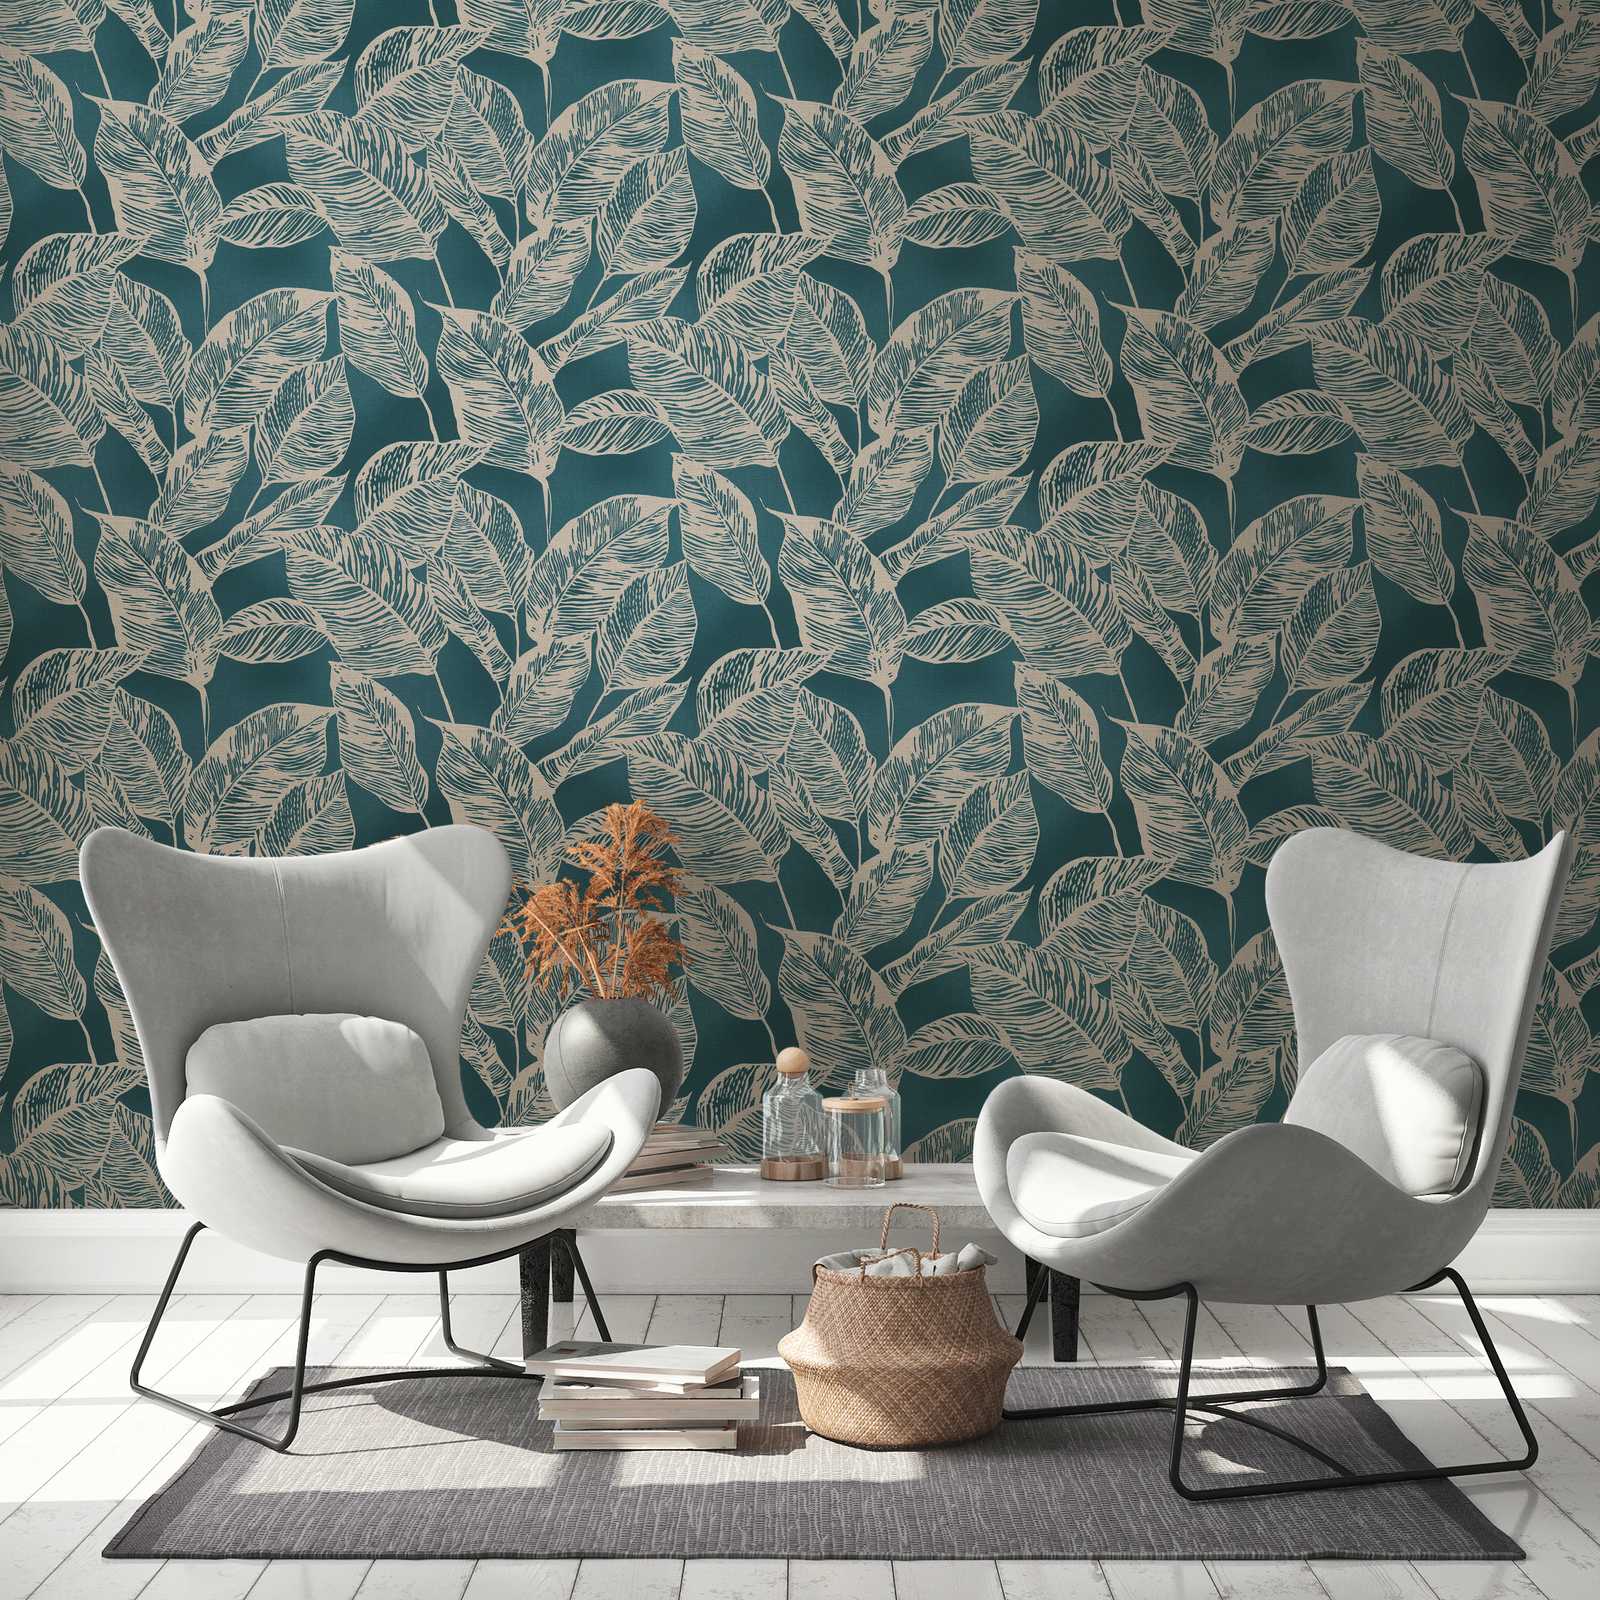             Non-woven wallpaper with leaf pattern PVC-free - Blue, Brown
        